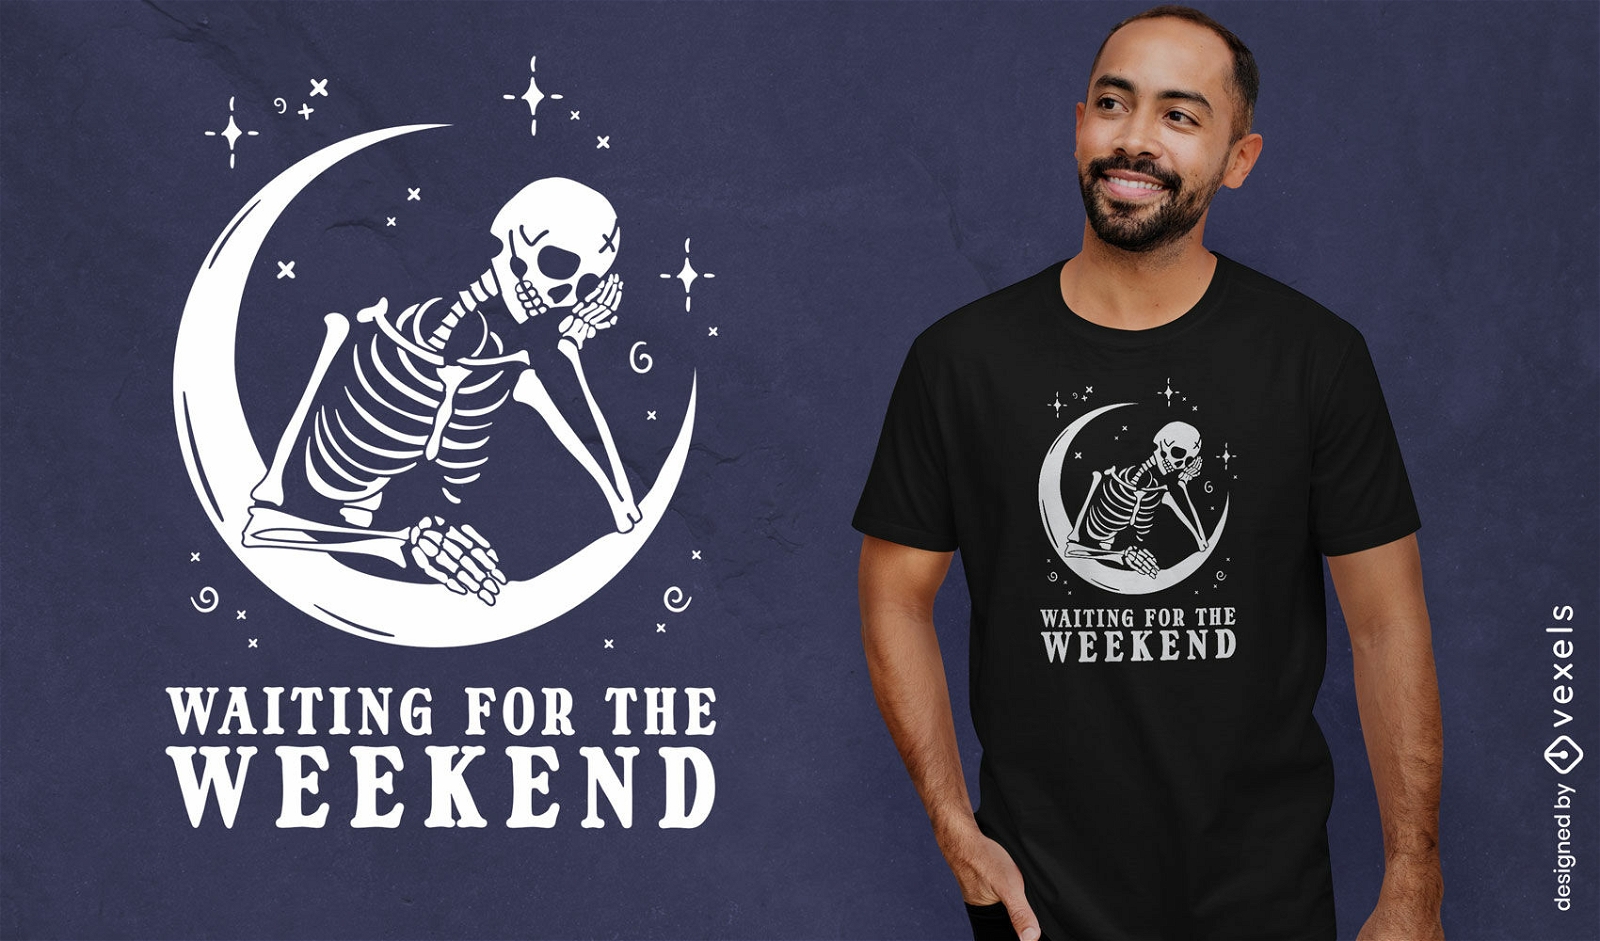 Waiting for the weekend t-shirt design